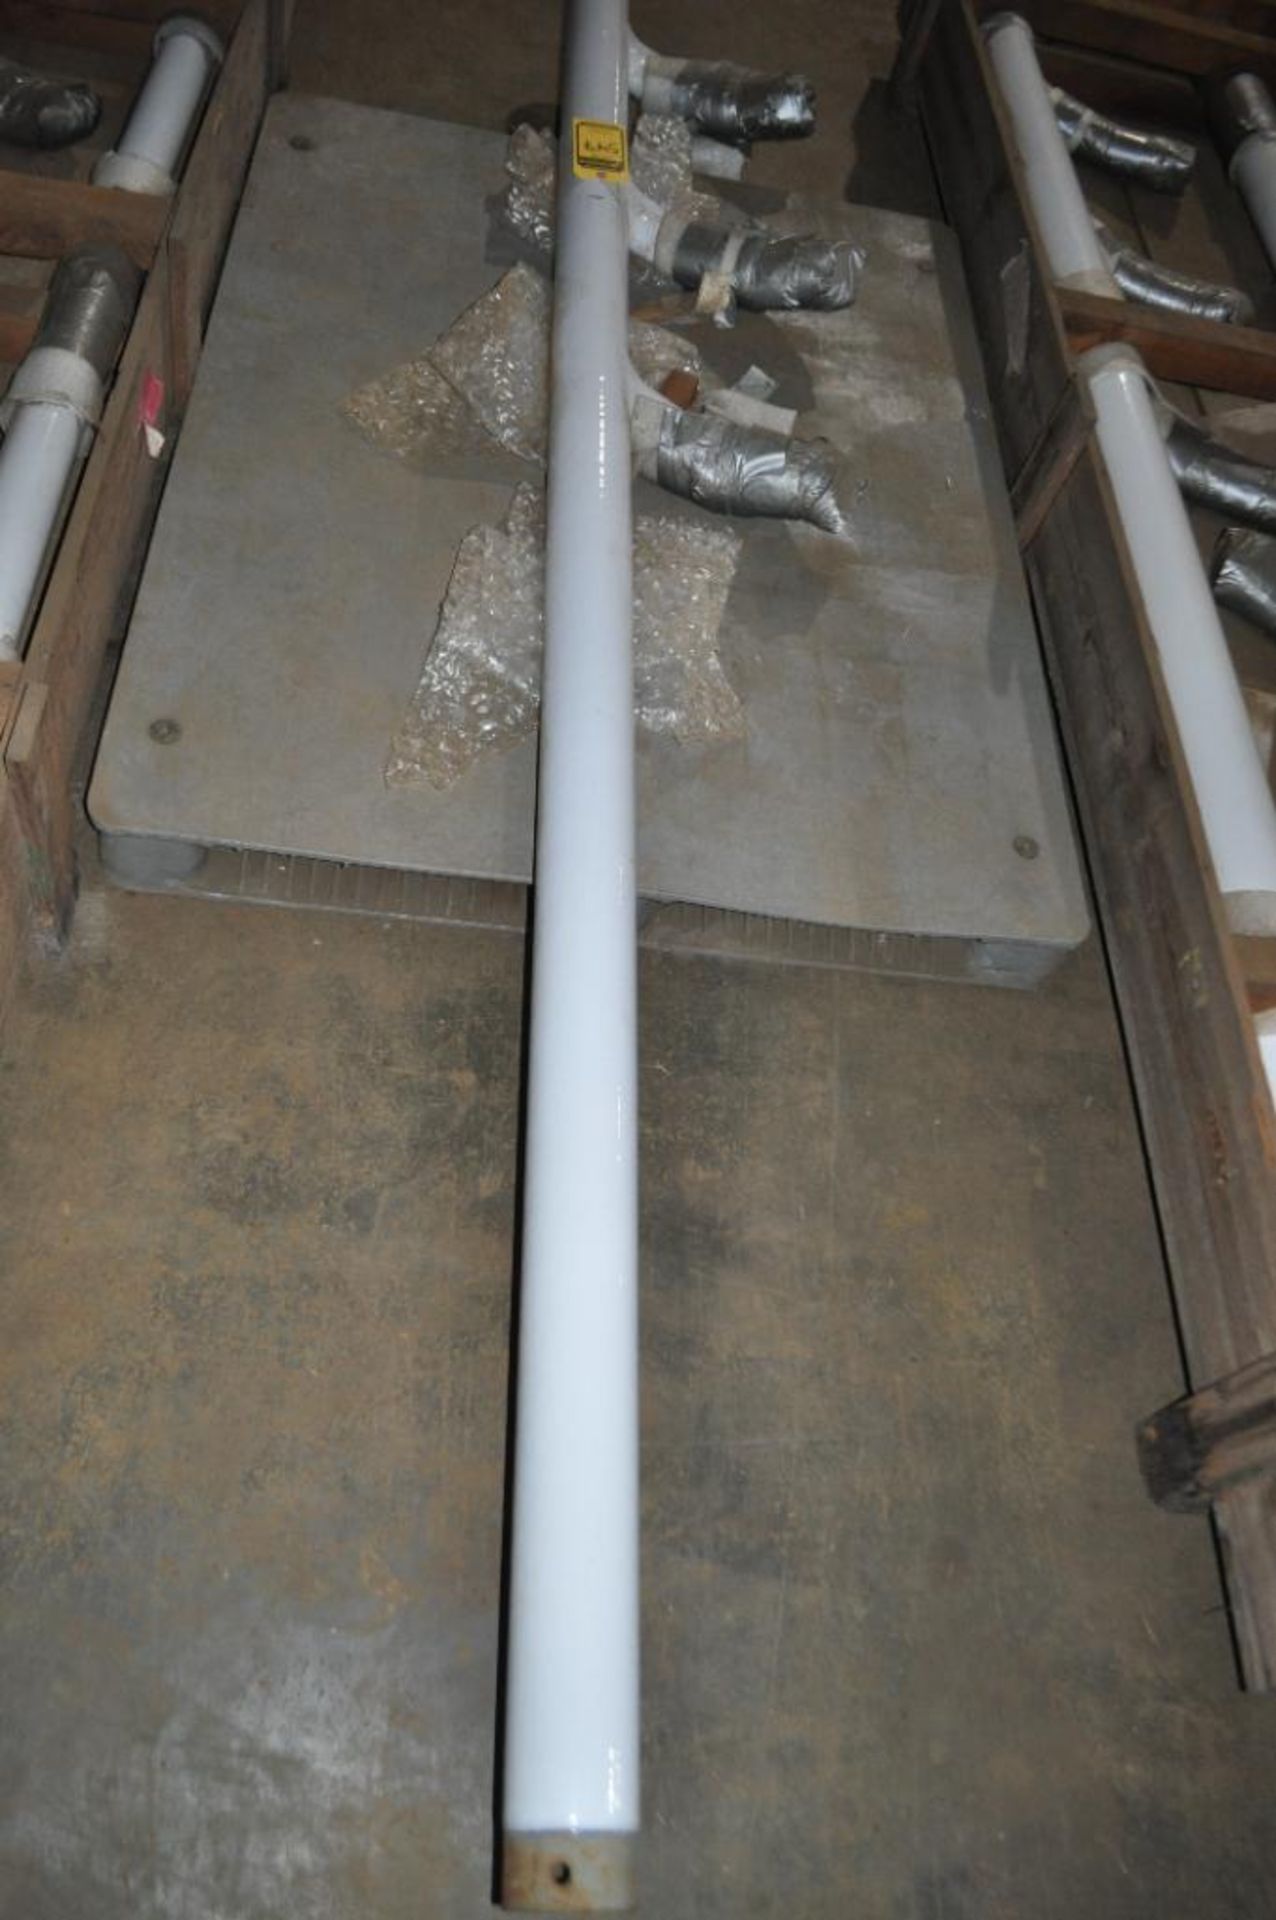 PFAUDLER/DIE DIETRICH GLASS LINED 3-FINGER BAFFLE, LENGTH: 112'', DIAMETER OF SHAFT: 3'', NEW - Image 2 of 4